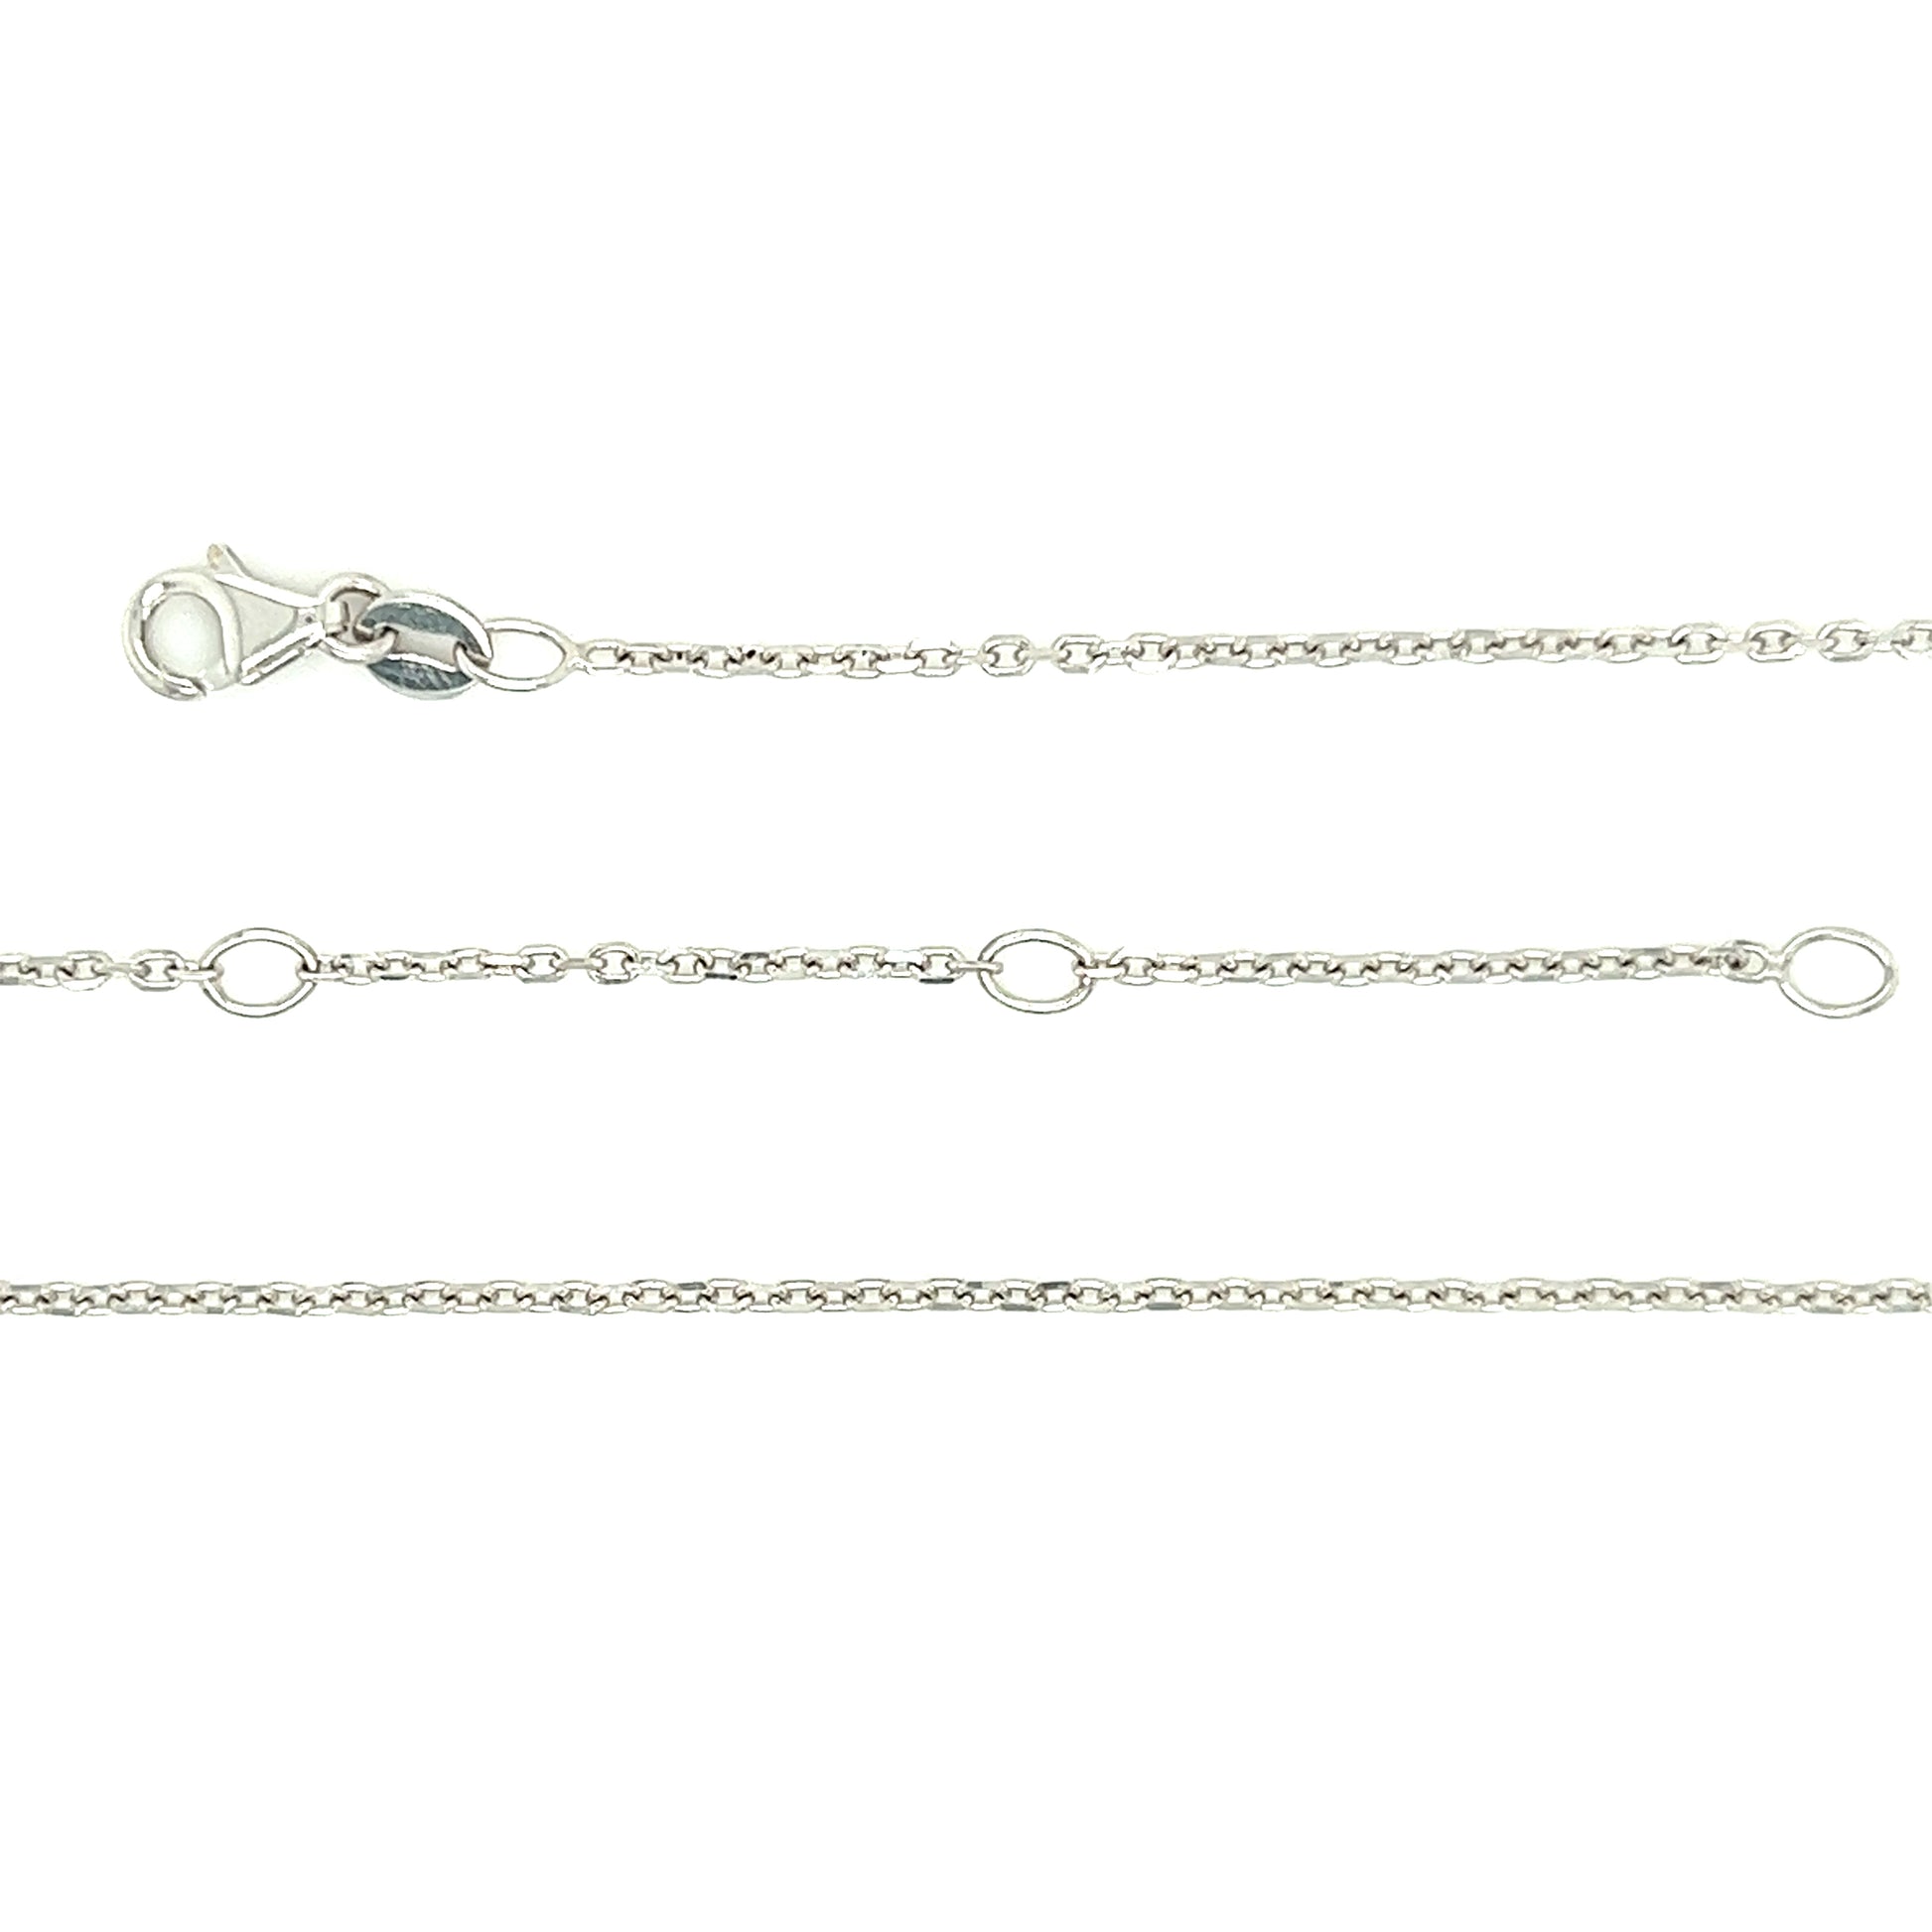 Cable Chain 1.3mm with Adjustable Length in 14K White Gold Chain and Clasp View